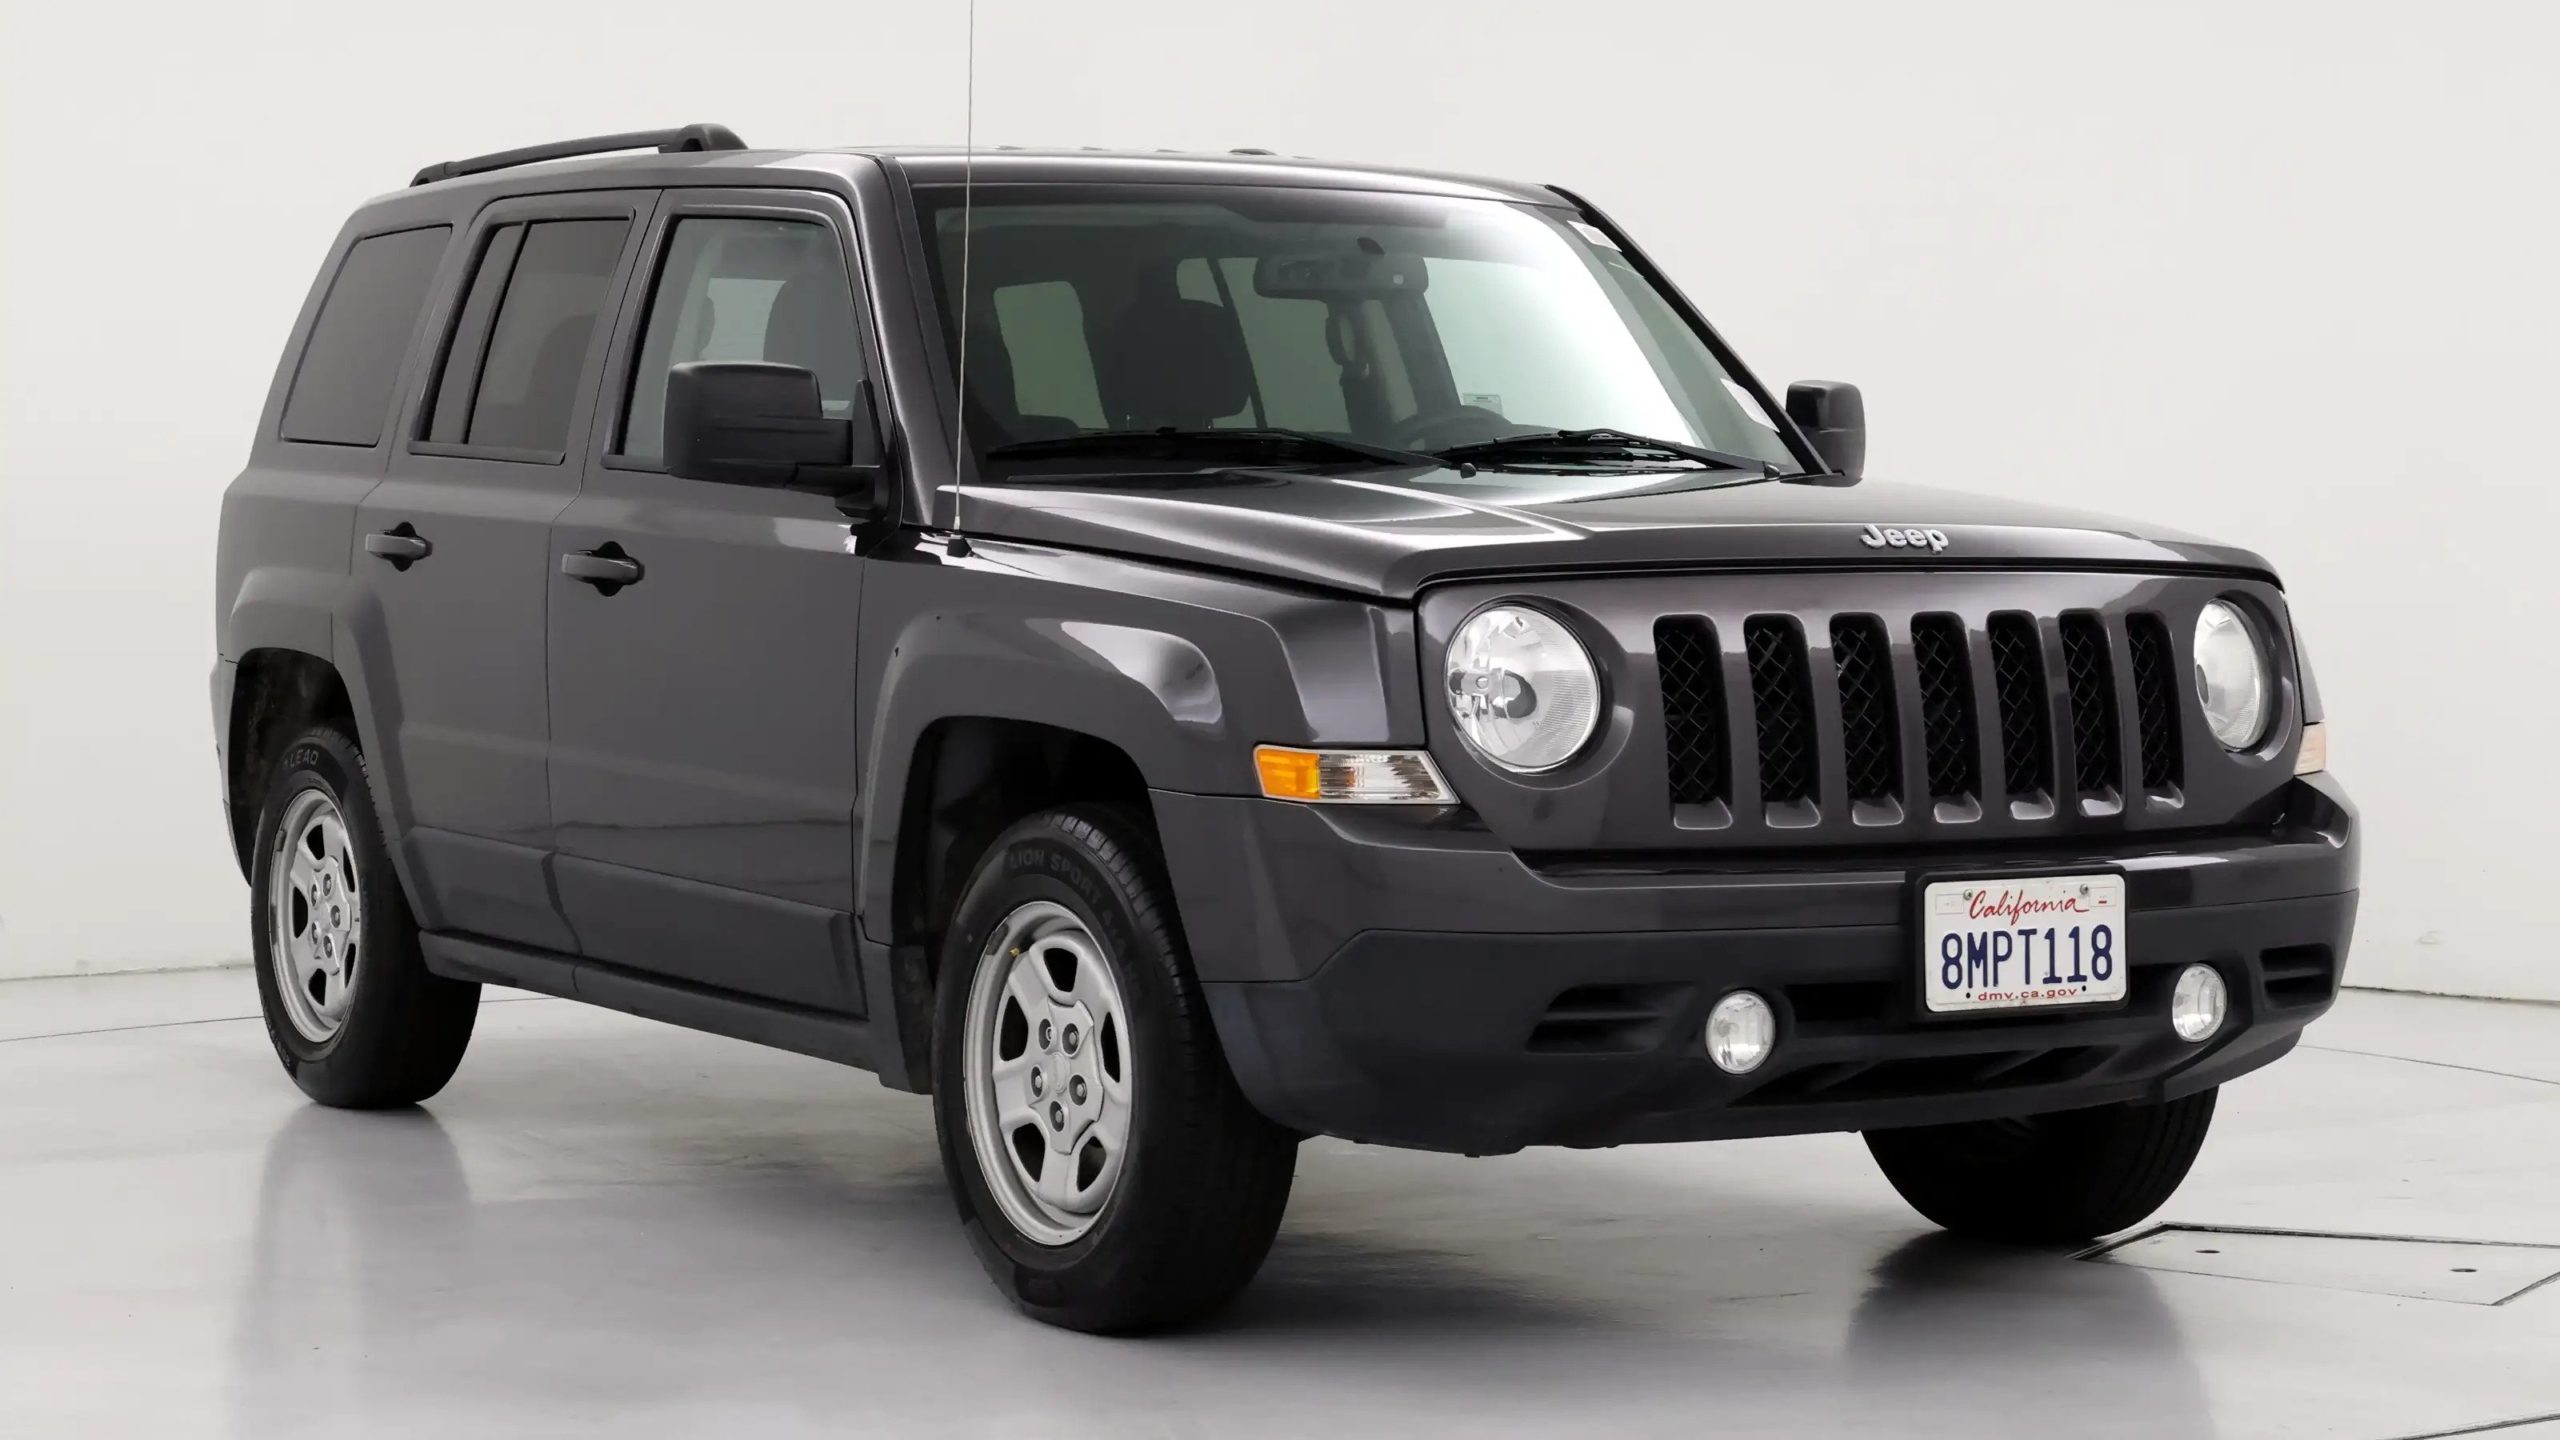 Jeep Patriot Lost Key Replacement